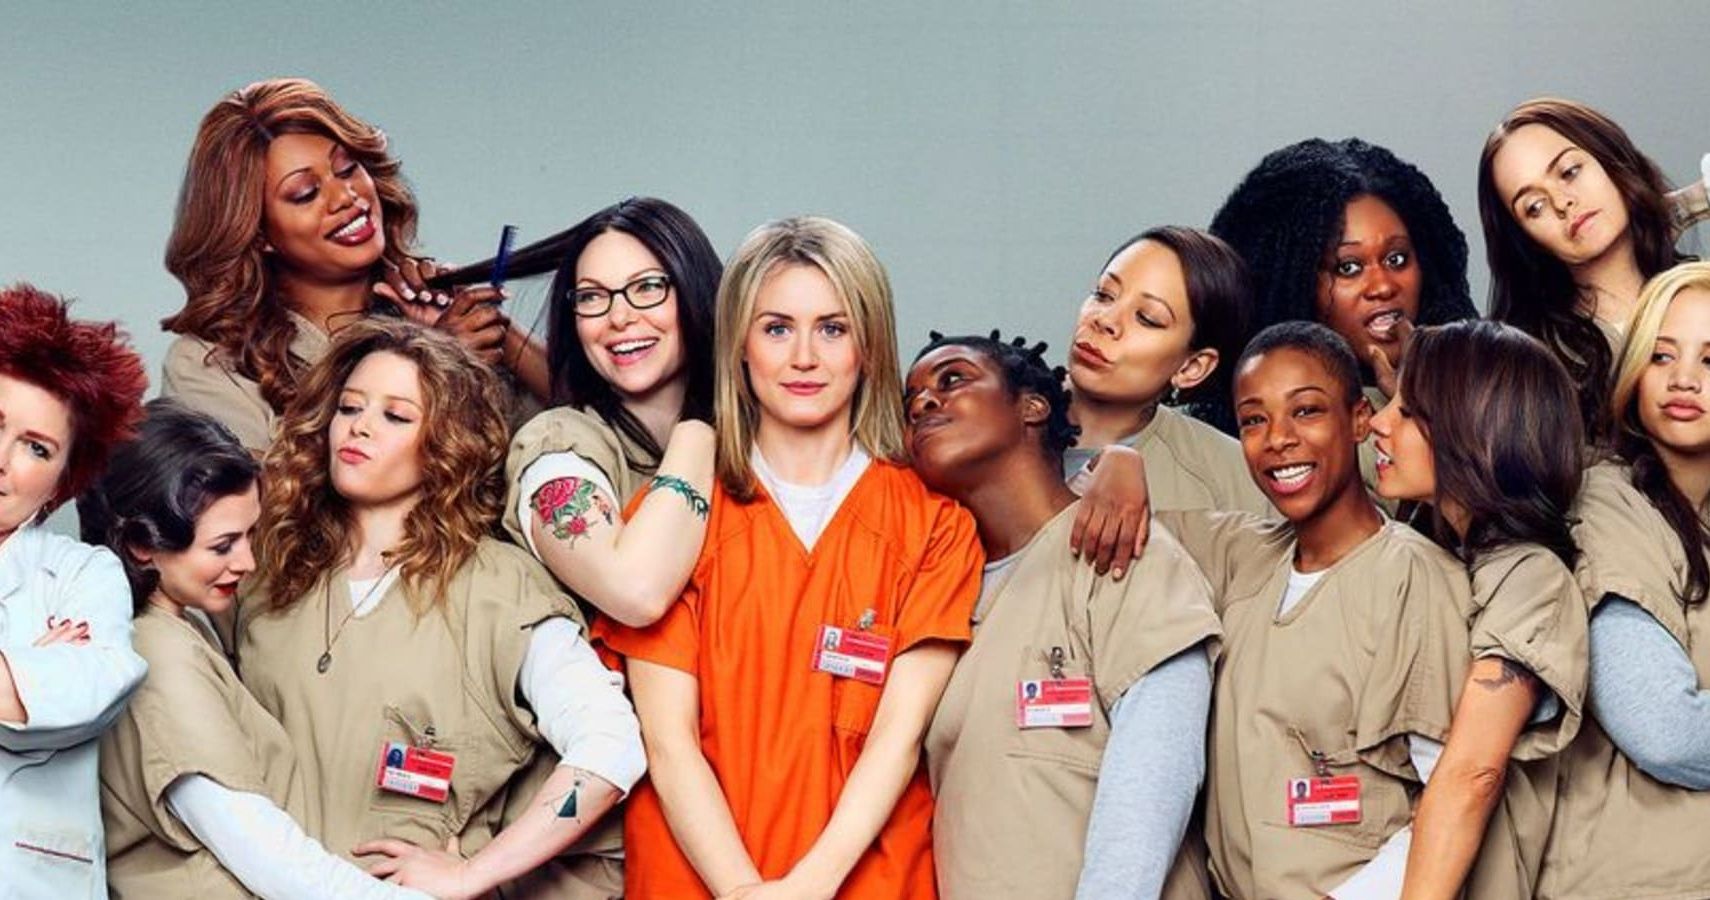 The diverse cast of Orange is the New Black